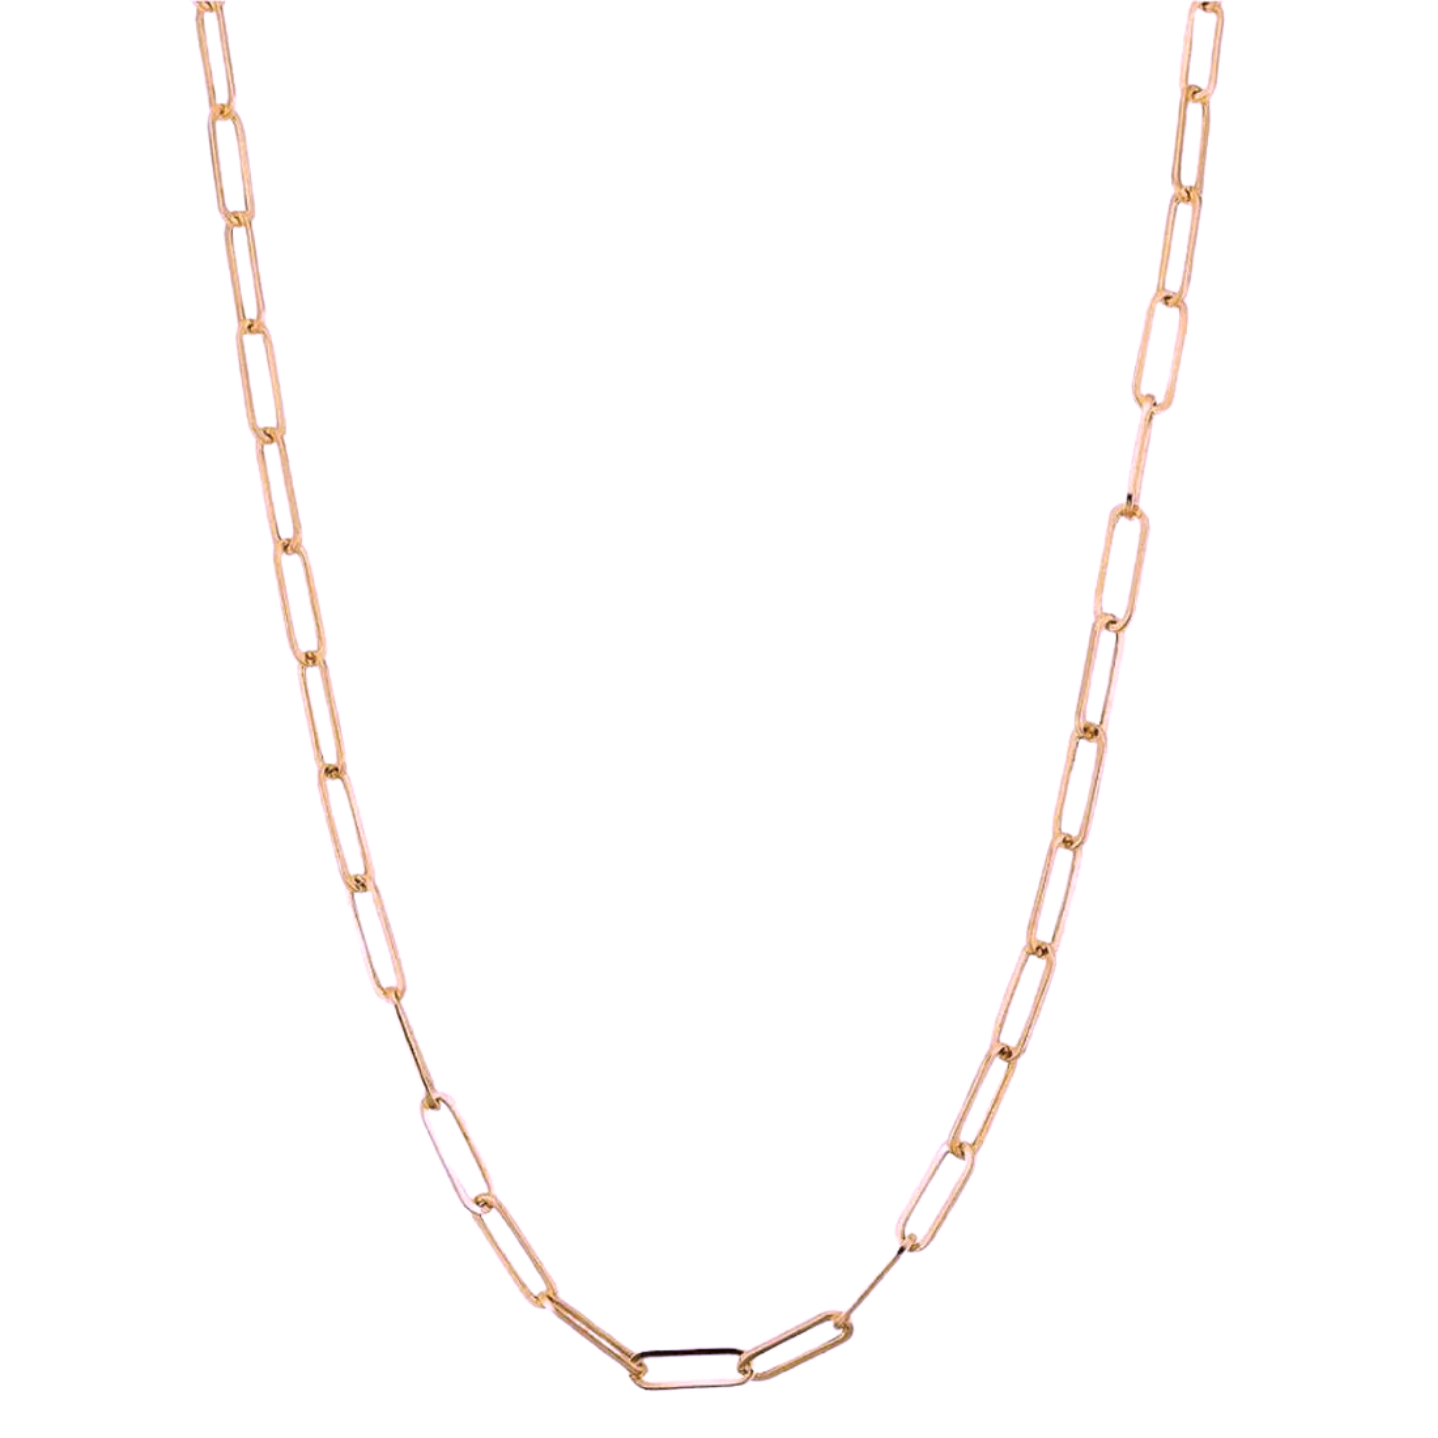 Paper Clip Chain - 10KT Rose Gold Chain